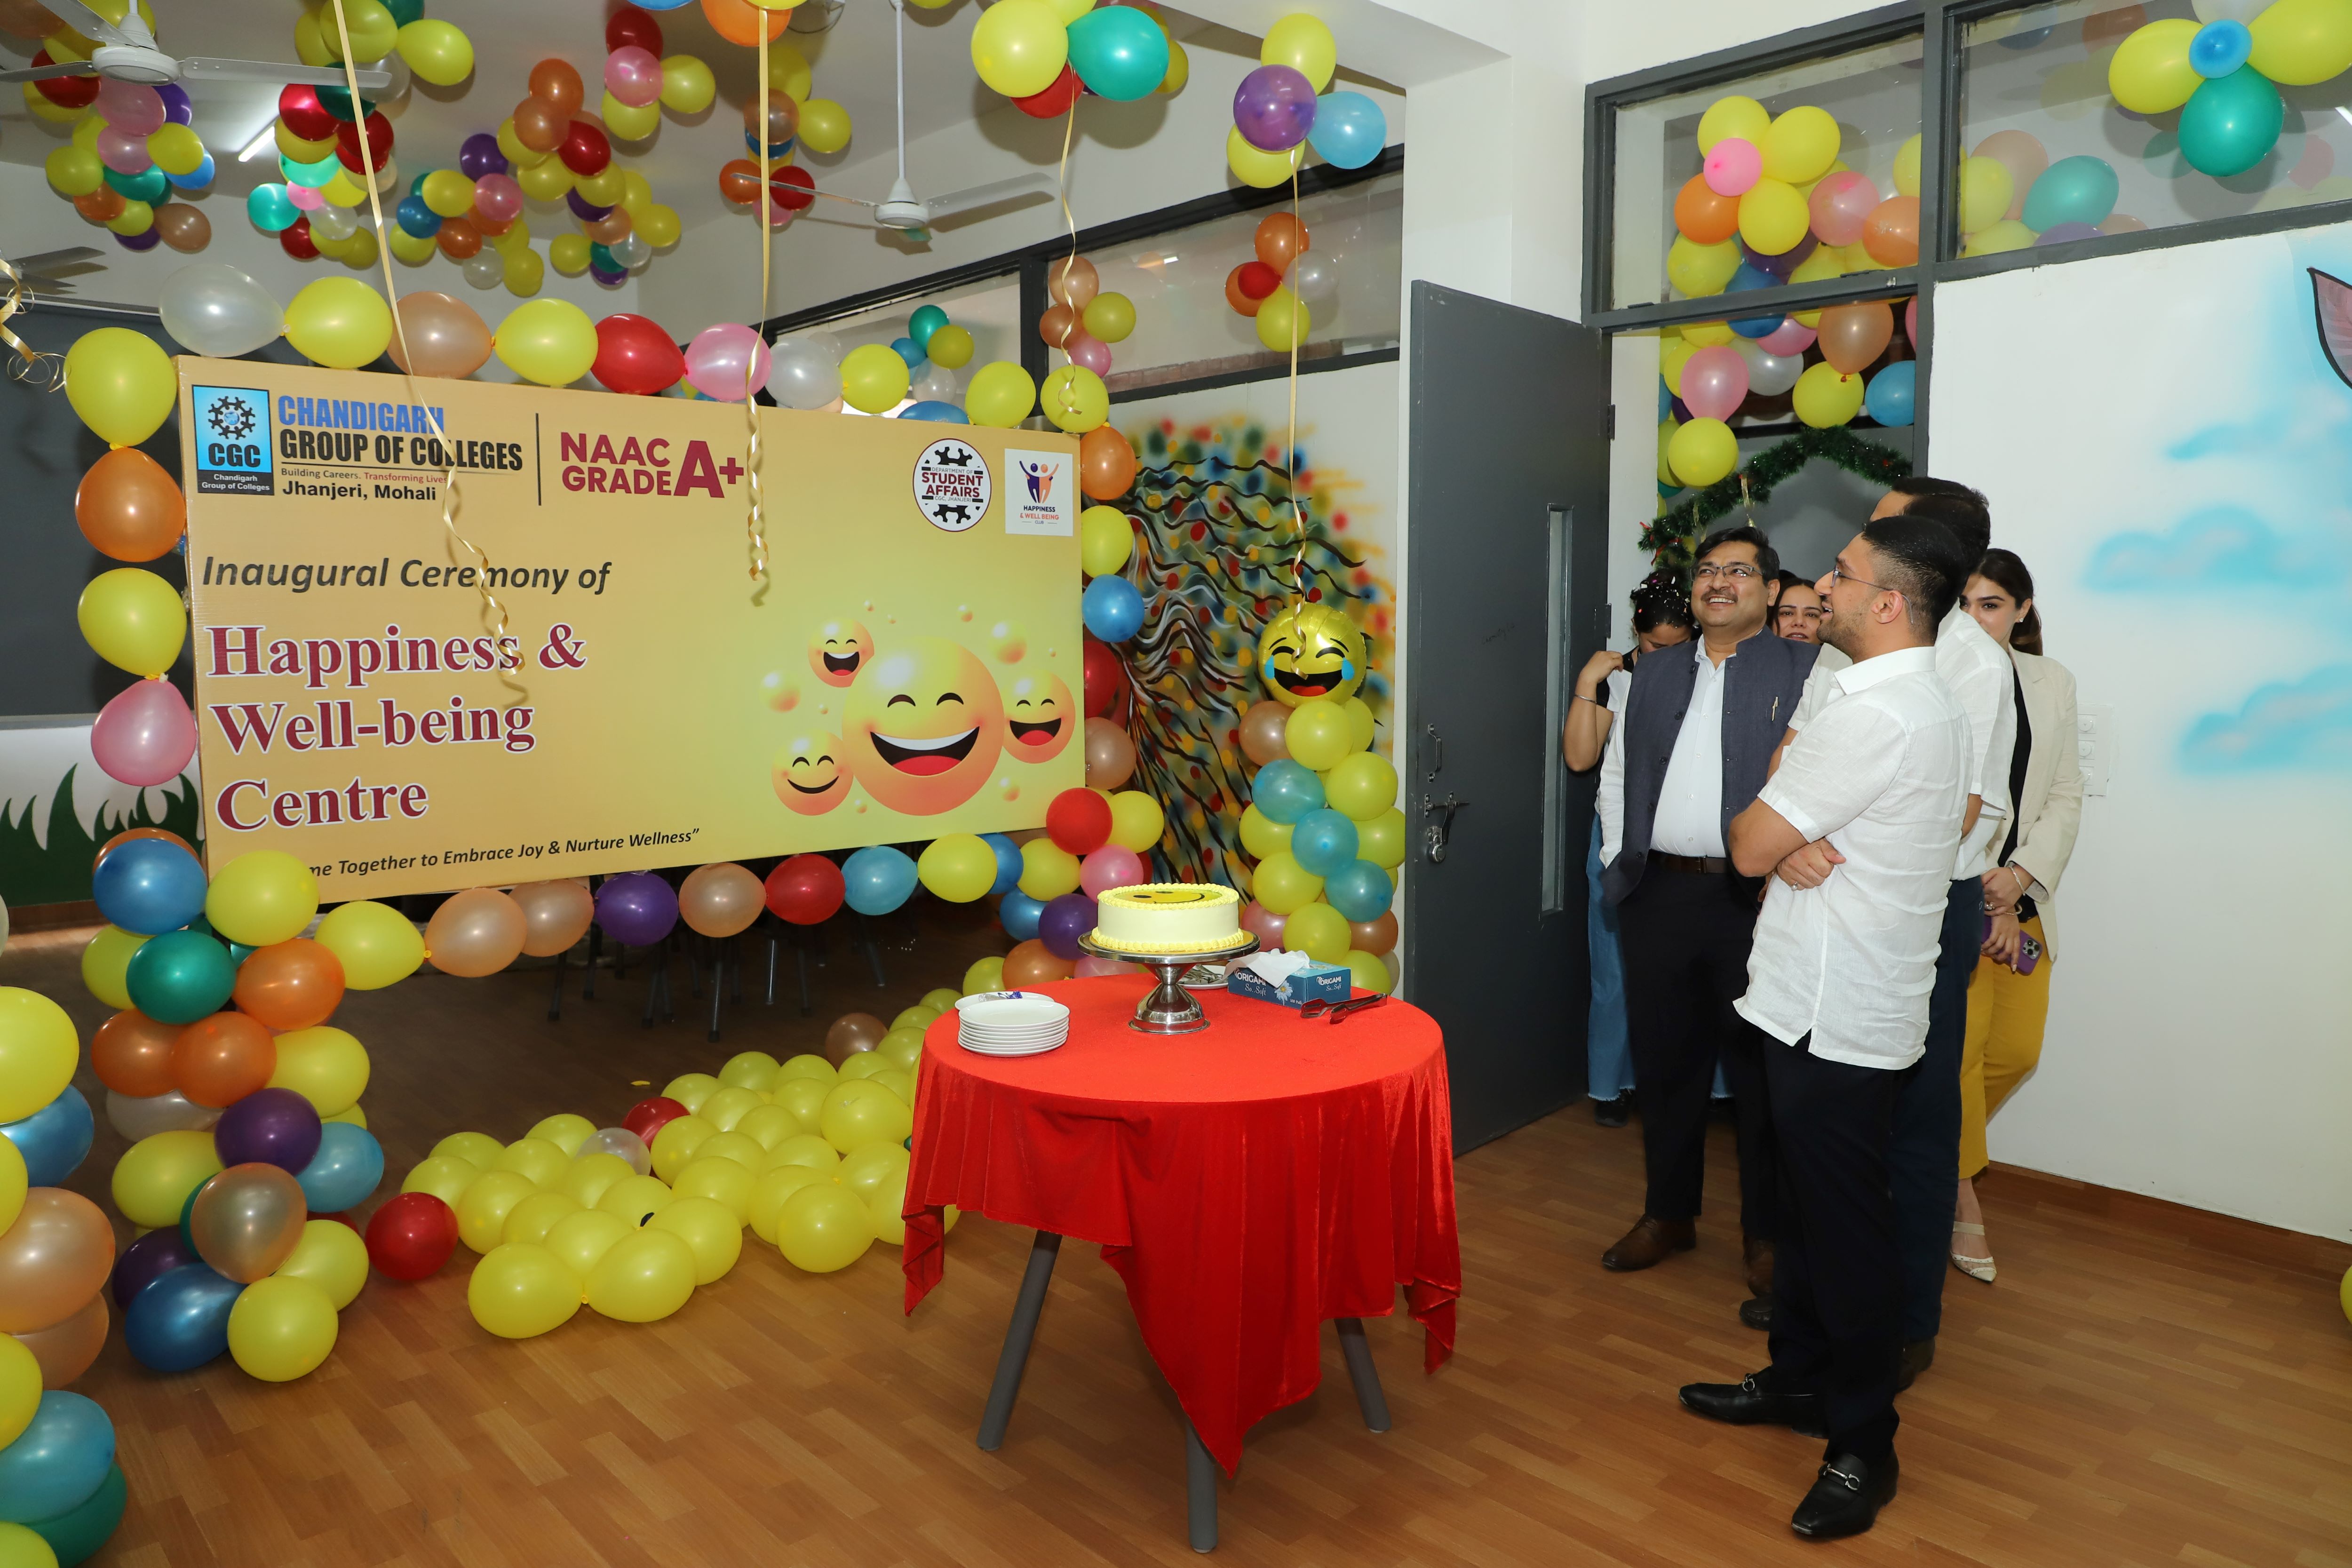 Inauguration of the Happiness & Well-Being Center